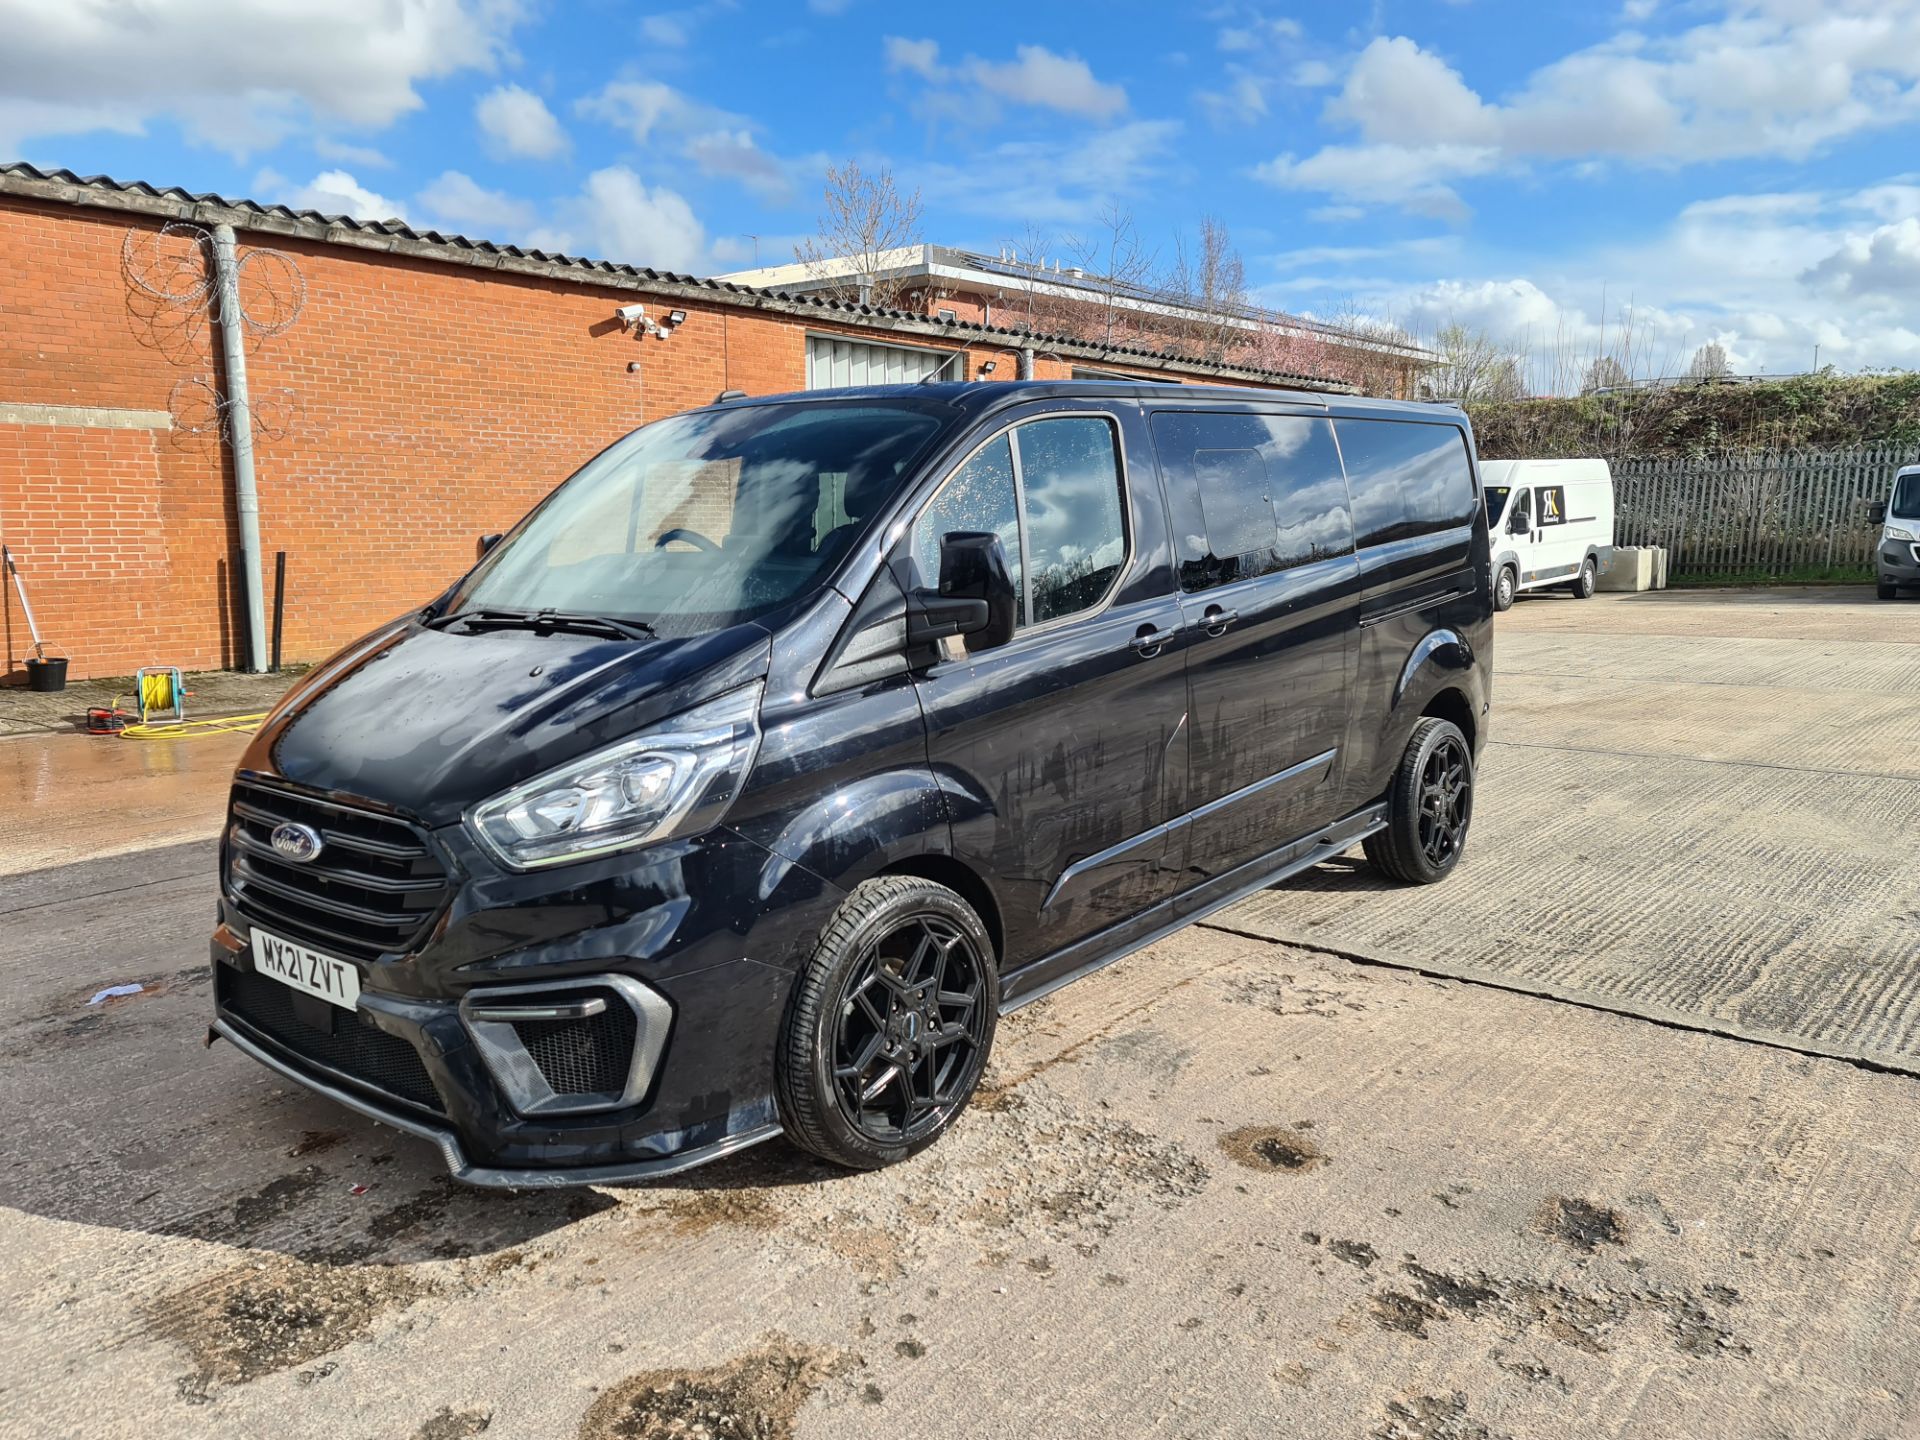 2021 Ford Transit 320LMTD Motion R panel van, auto gearbox, Ultra High Spec - Image 7 of 102